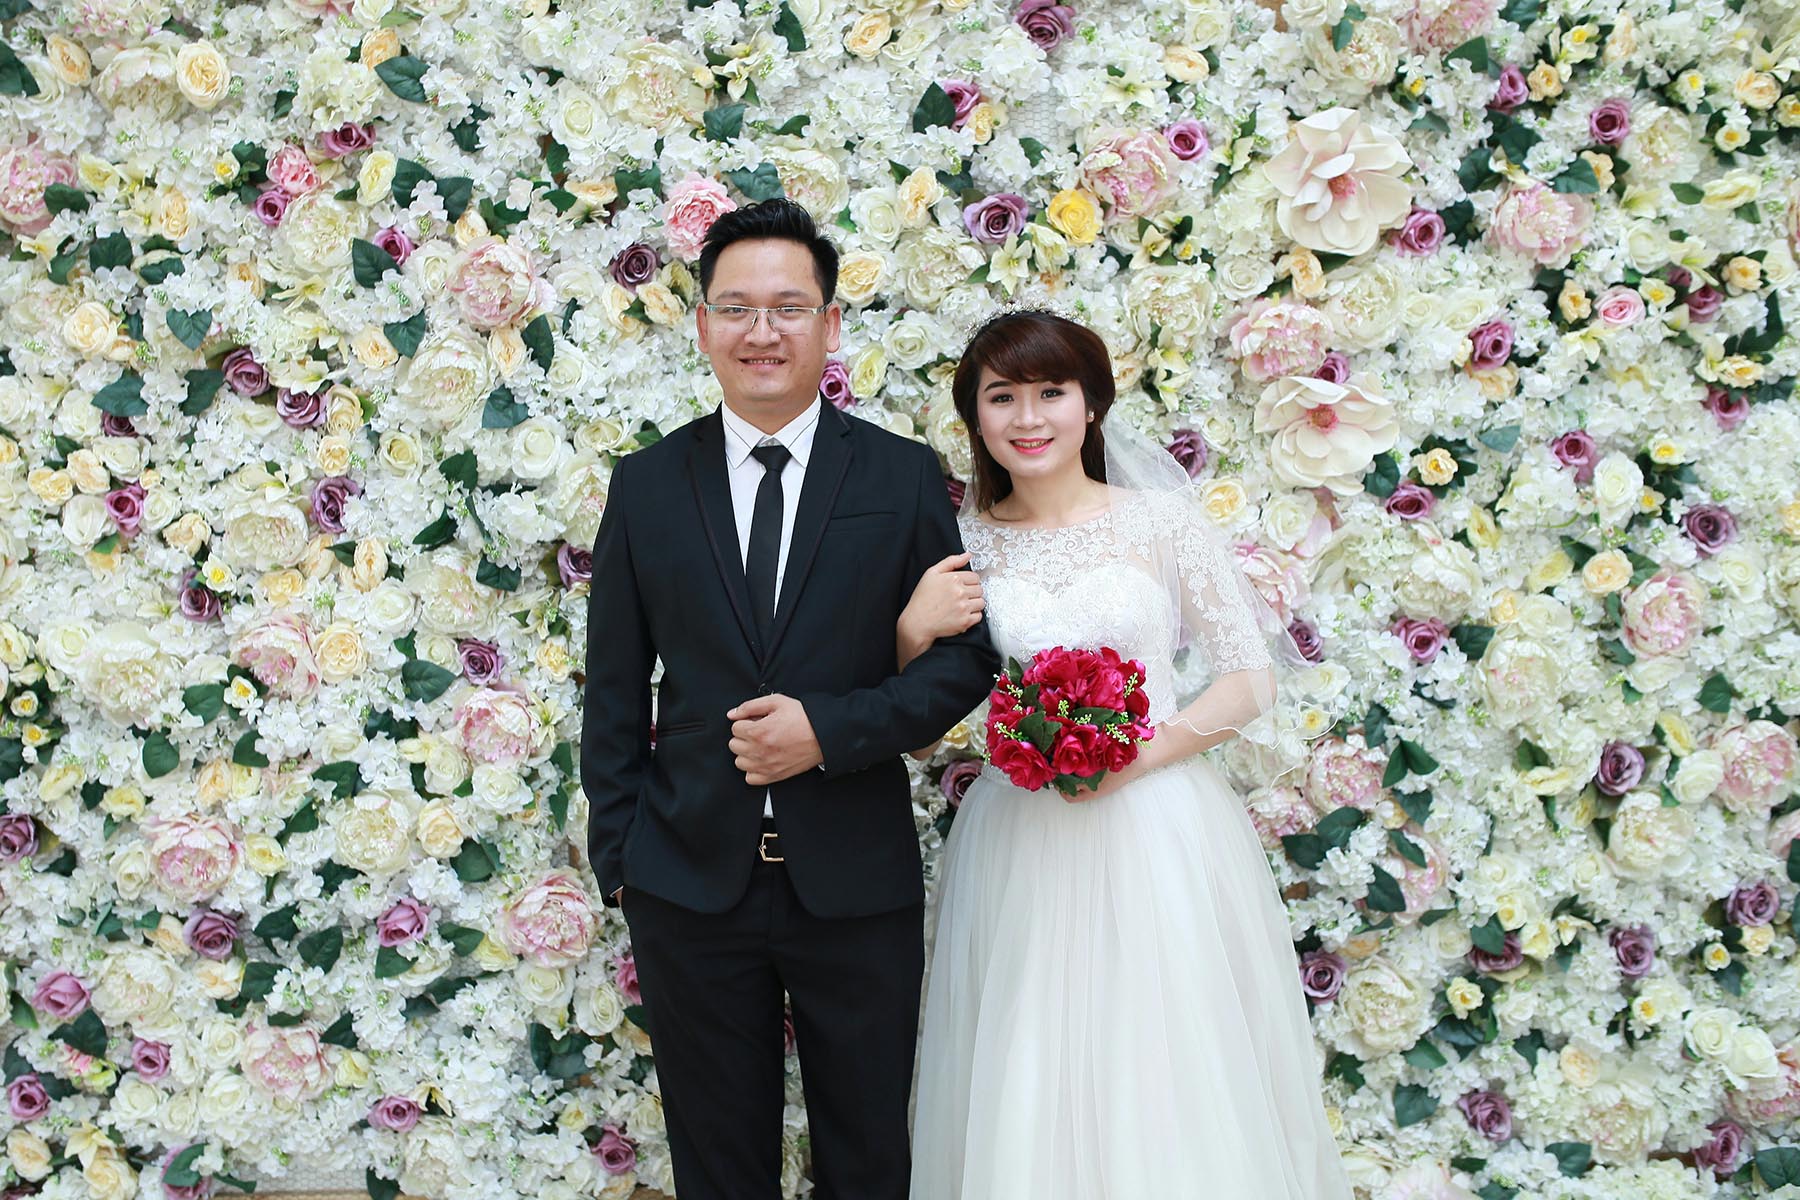 Soon-to-be married couple standing in front of a flower wall.